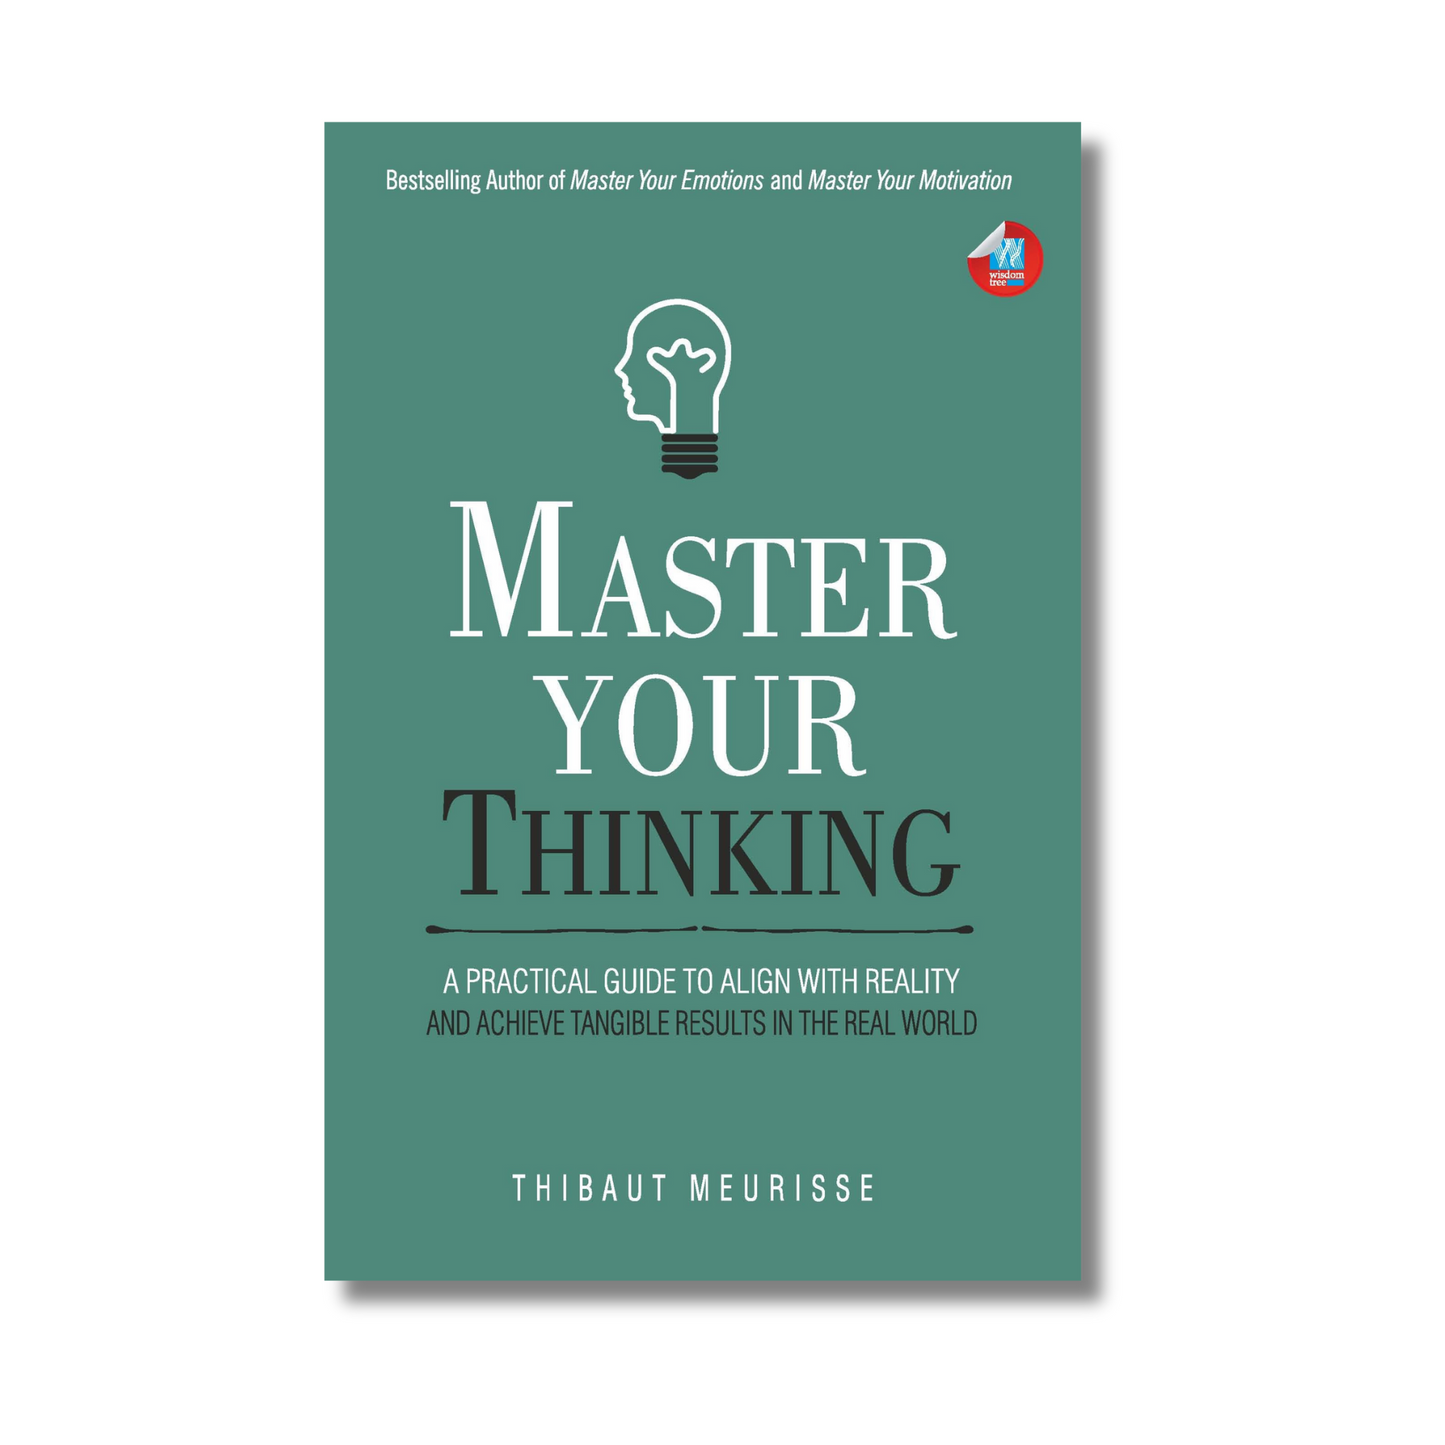 Master Your Thinking By Thibaut Meurisse (Paperback)